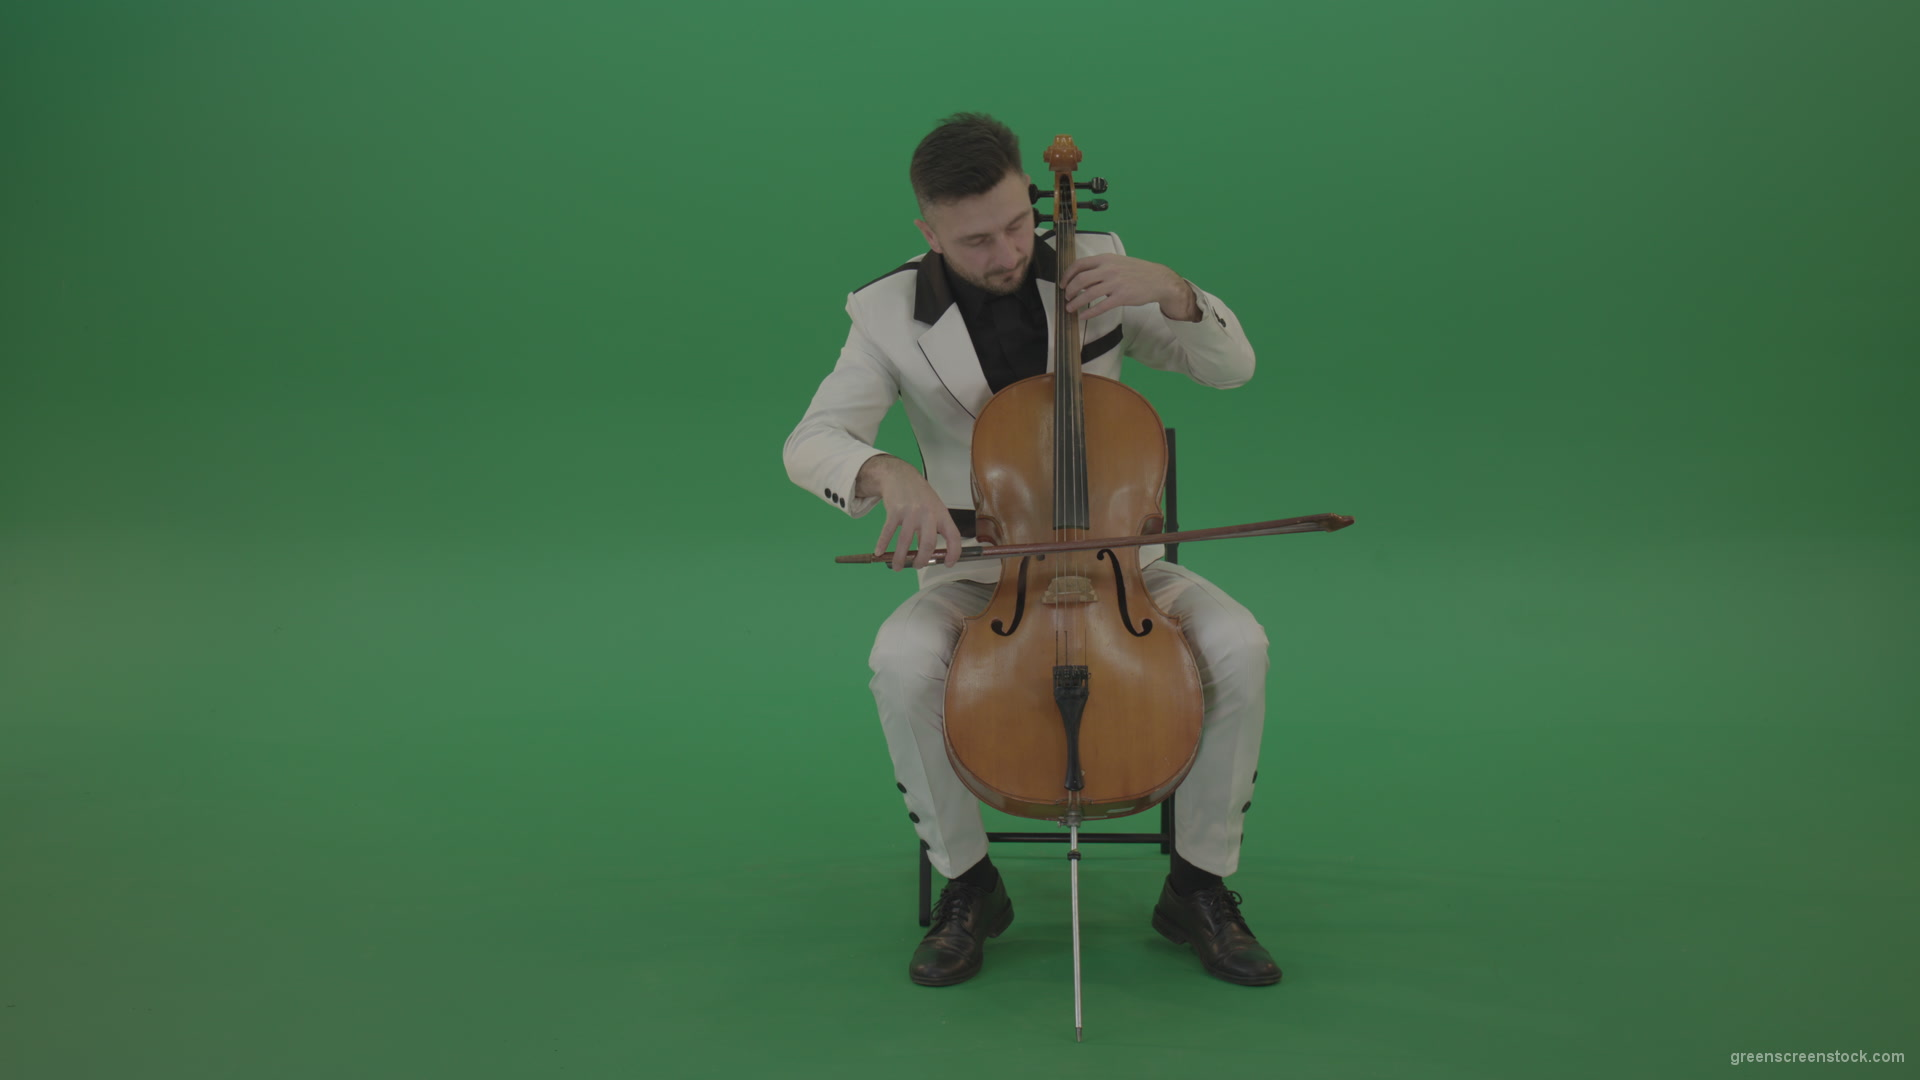 Classic-orchestra-man-in-white-wear-play-violoncello-cello-strings-music-instrument-isolated-on-green-screen_001 Green Screen Stock